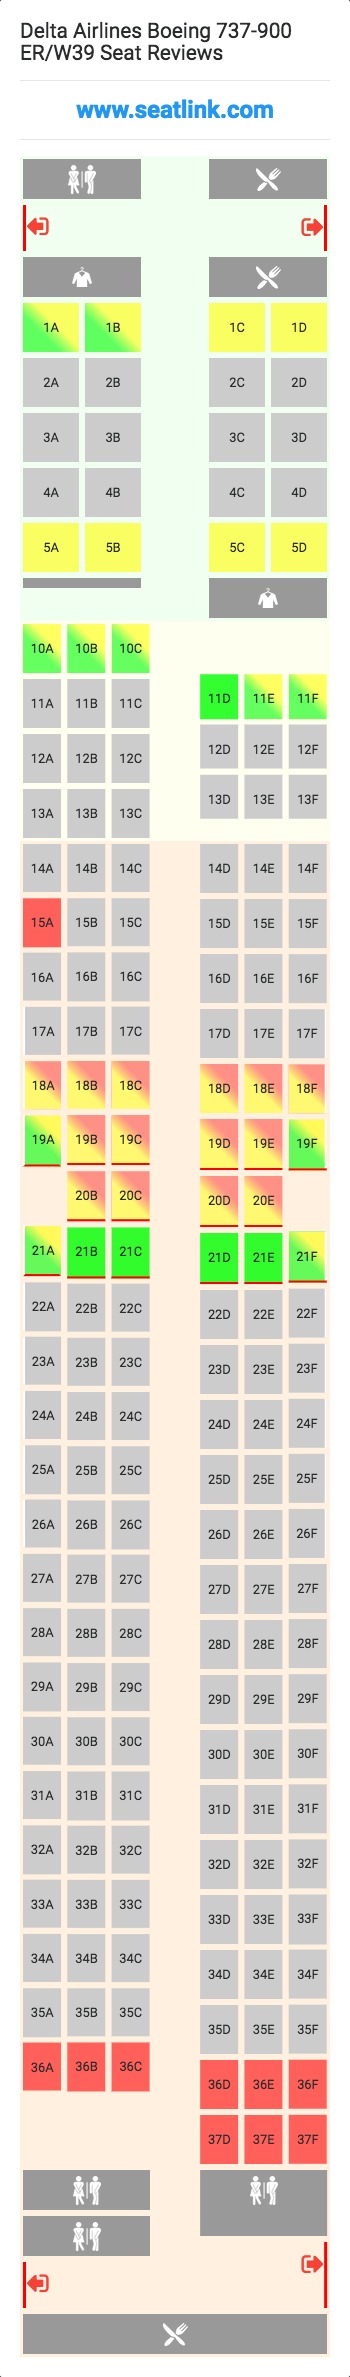 Delta Airlines Boeing 737-900 ER/W39 Seating Chart - Updated ...